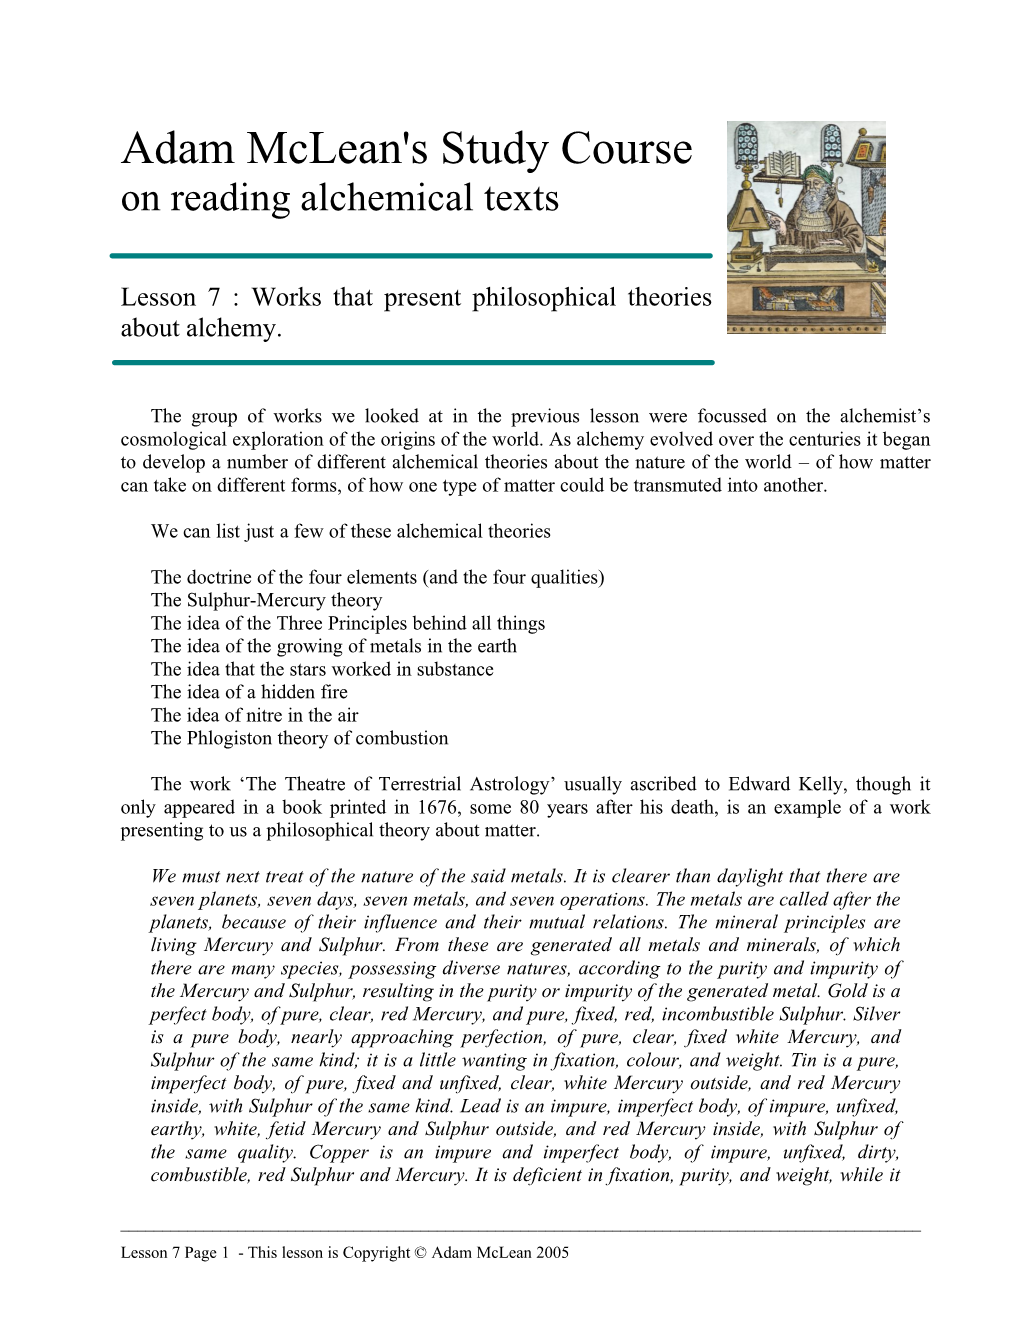 Adam Mclean's Study Course on Reading Alchemical Texts